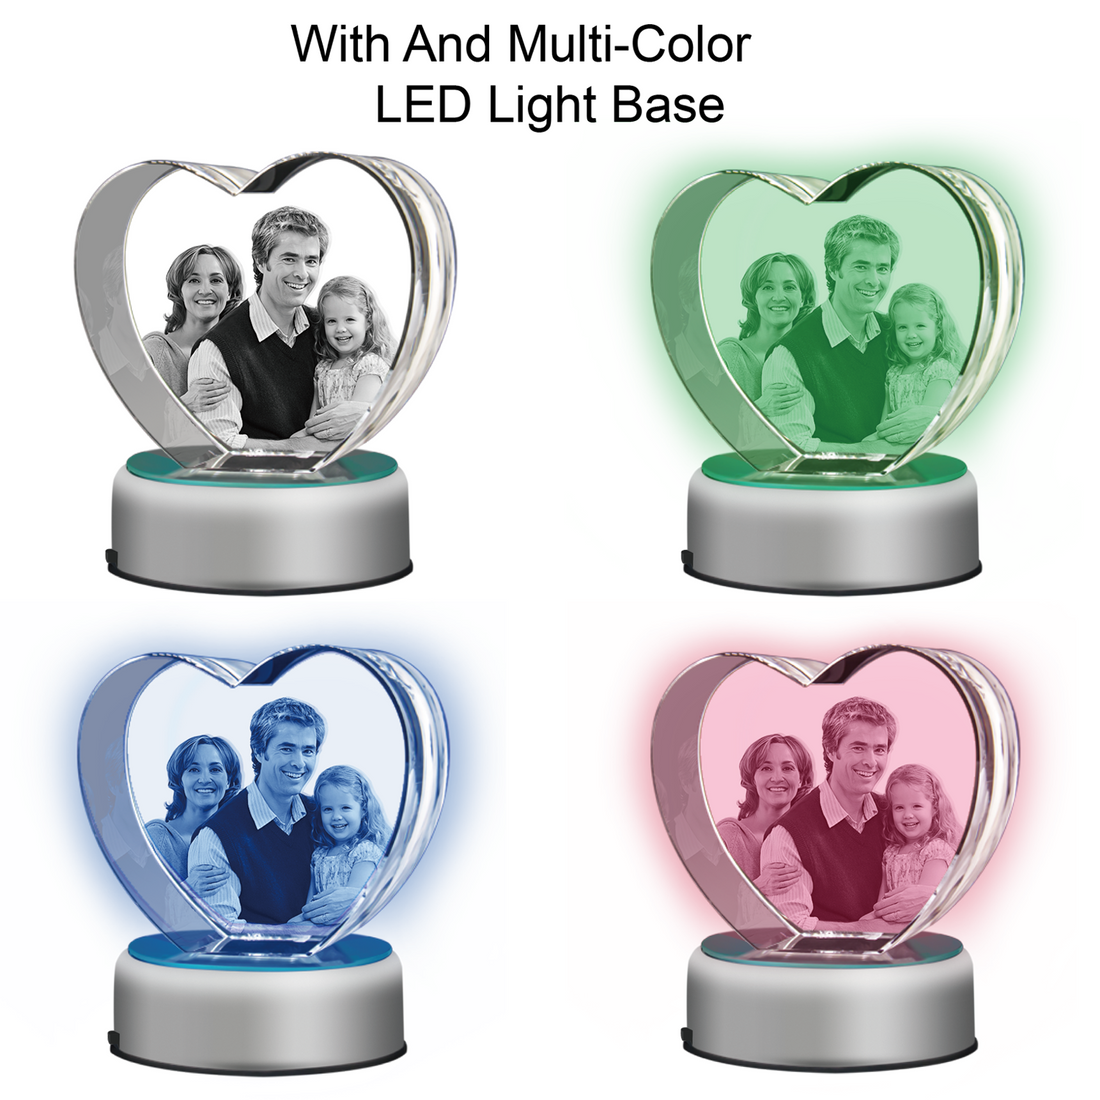 Set of 2 Small 3D Crystal Heart (Upload Your Picture)